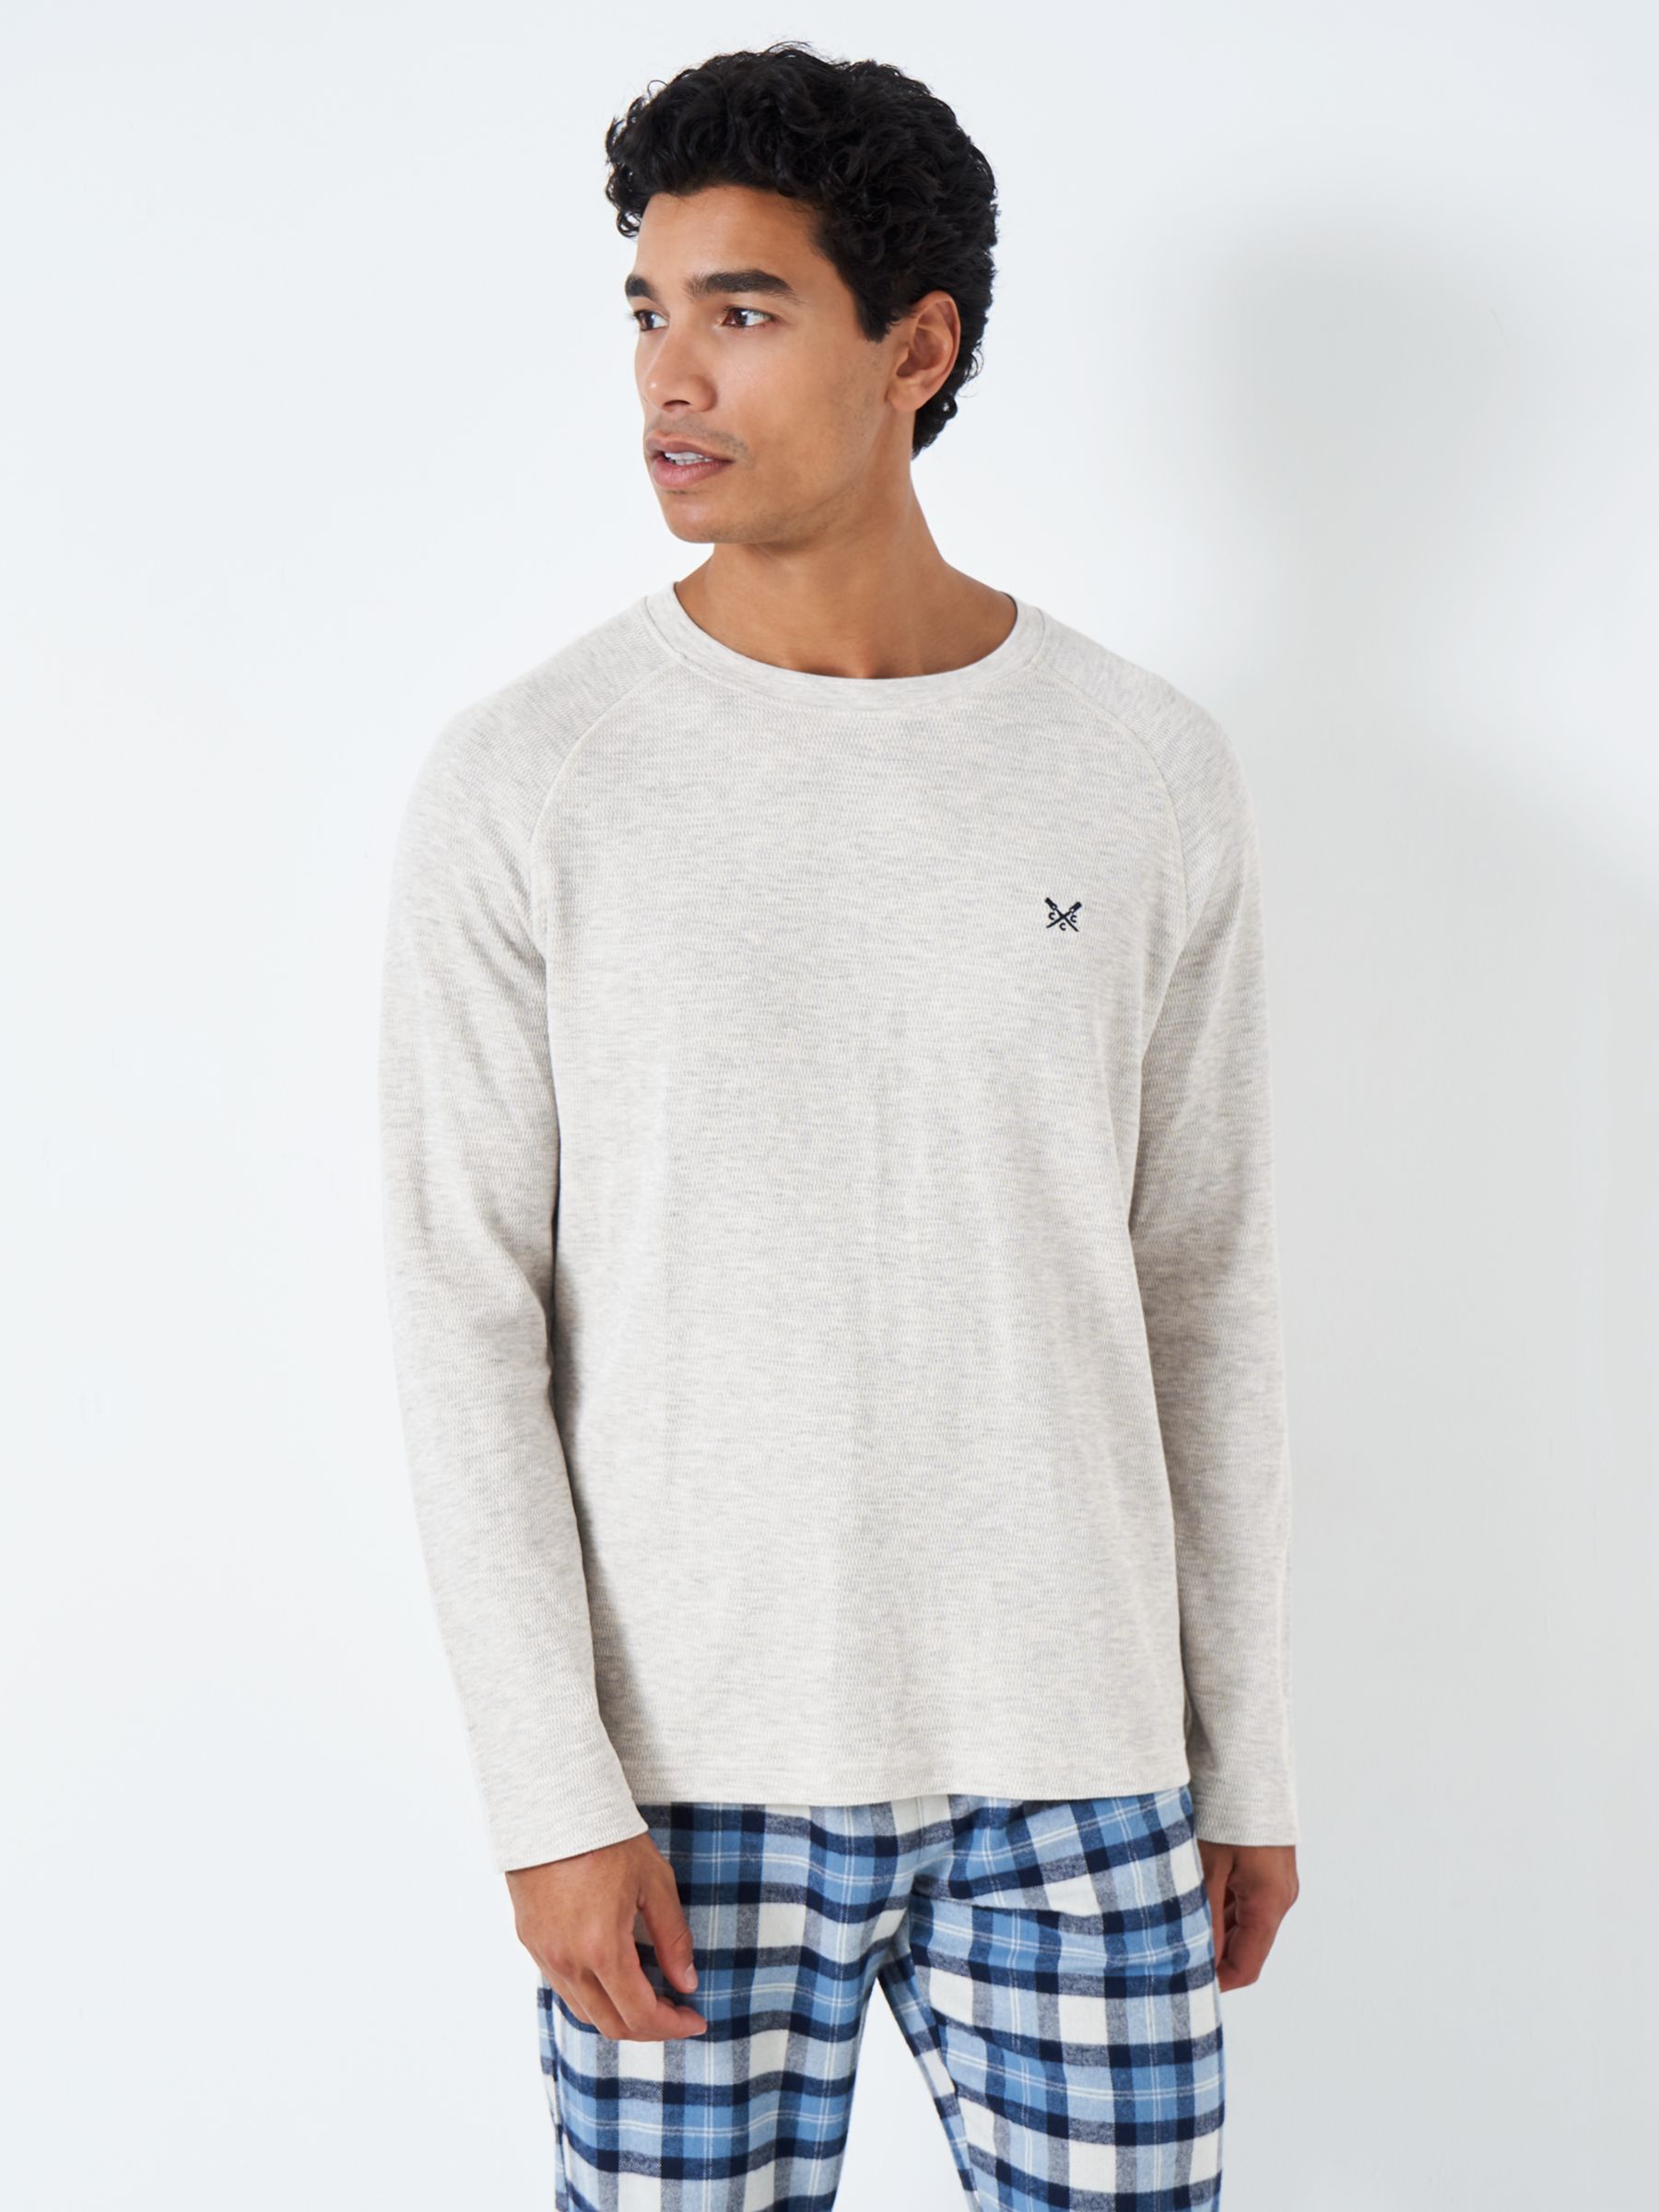 Buy Crew Clothing Jersey Long Sleeve Top Online at johnlewis.com